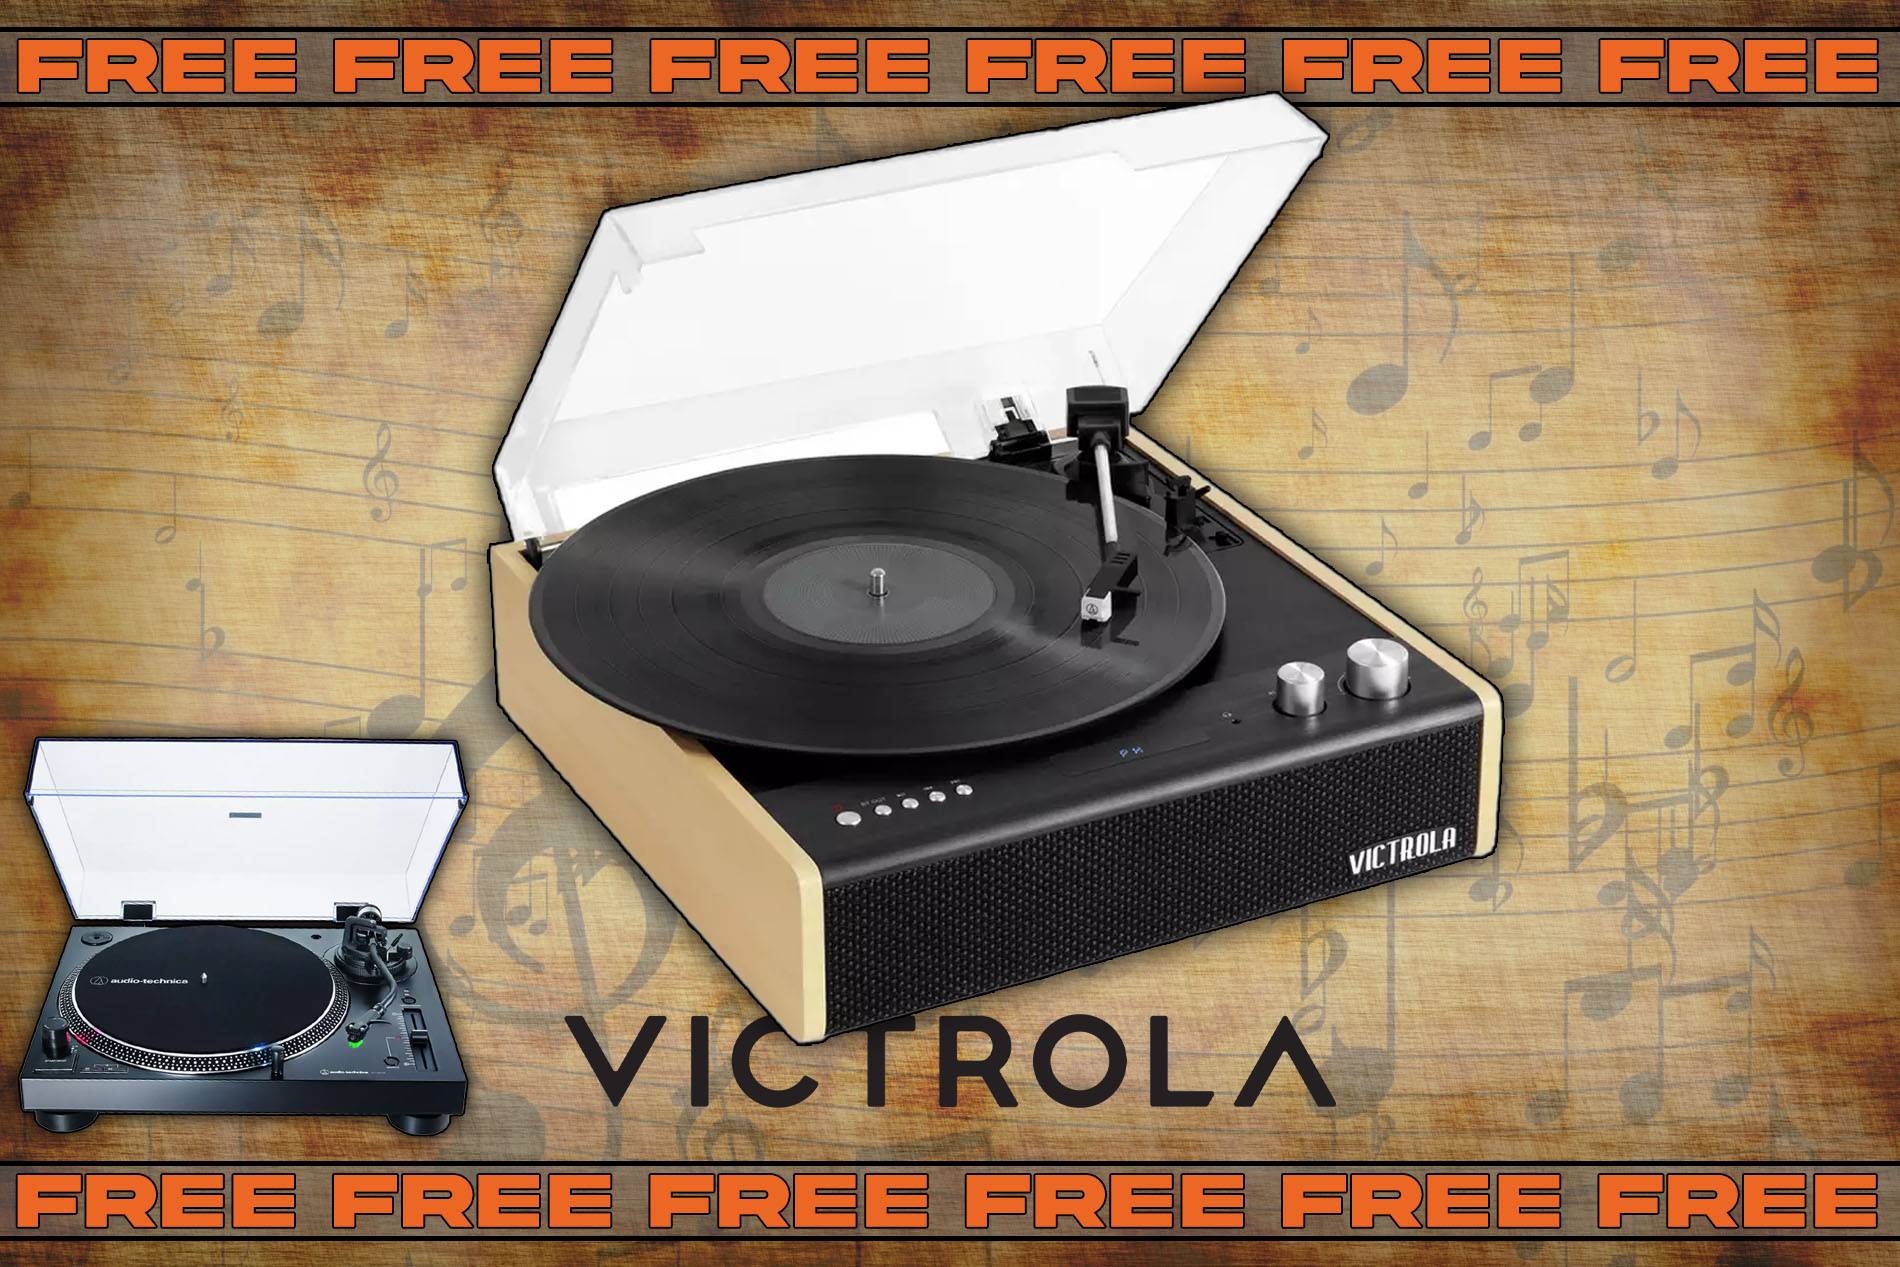 Free To Enter: Victrola Record Player (Spend £1+ and upgrade to Audio-Technica Record Player)